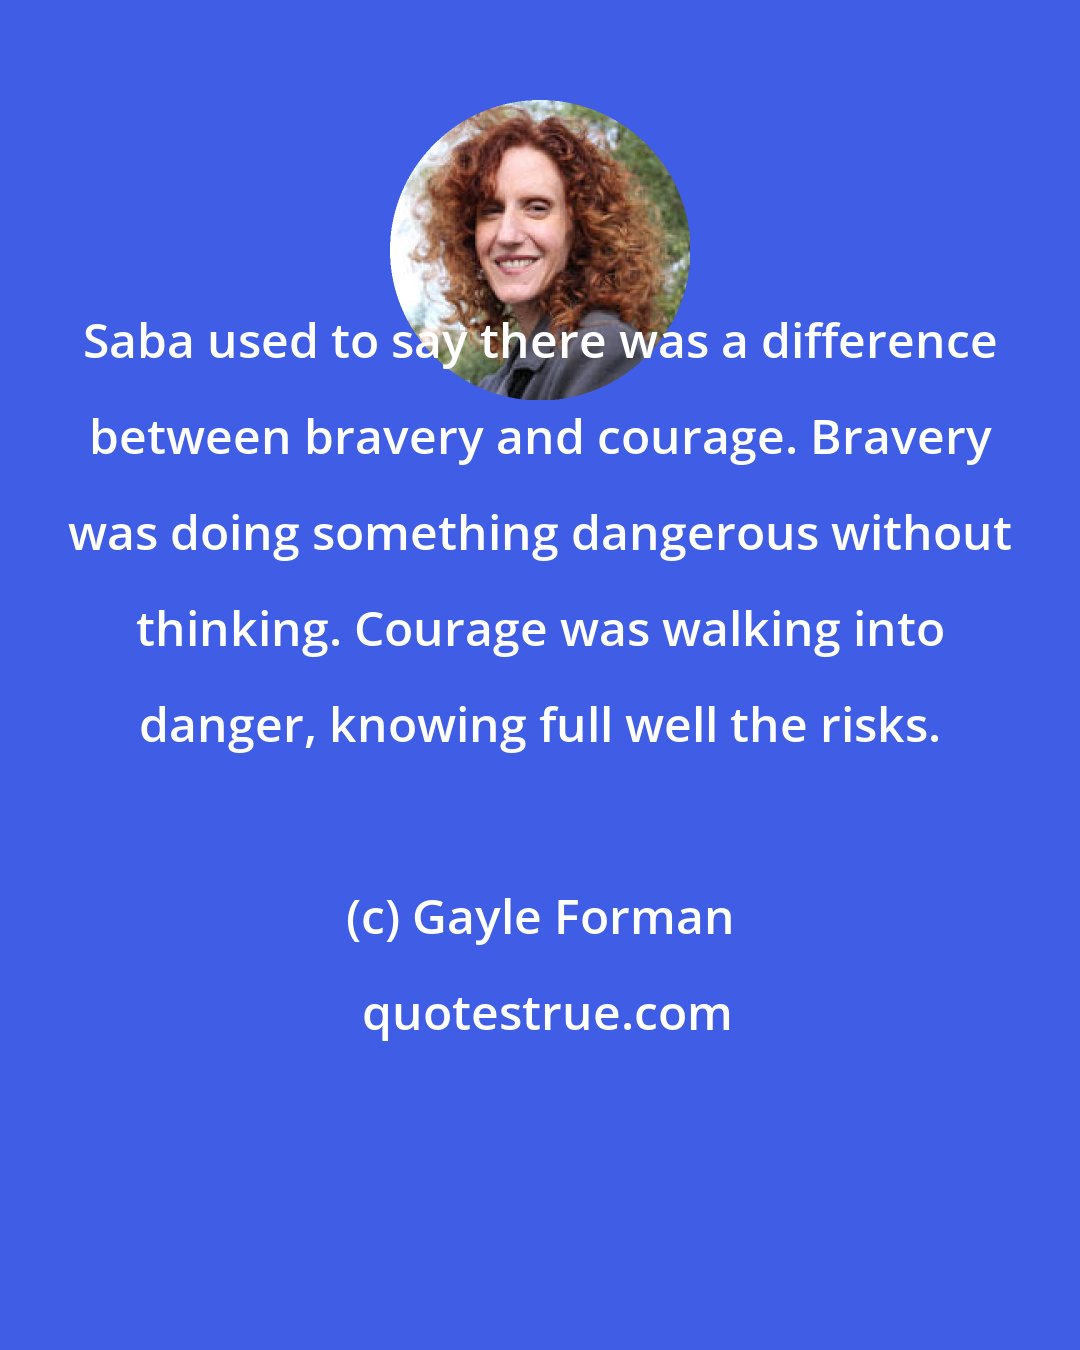 Gayle Forman: Saba used to say there was a difference between bravery and courage. Bravery was doing something dangerous without thinking. Courage was walking into danger, knowing full well the risks.